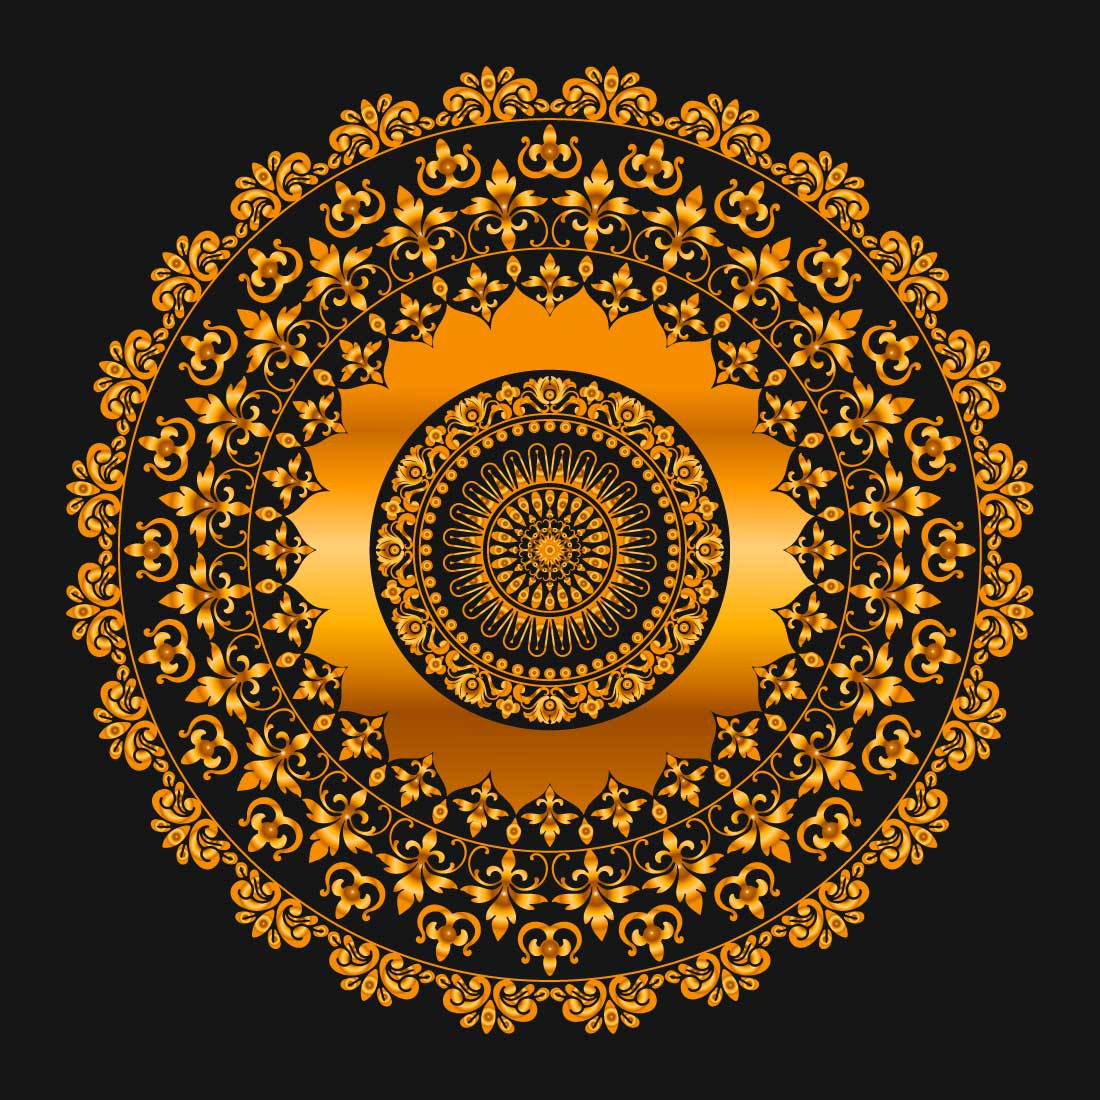 05pcs Exclusive, Elegant, Royal, Luxury Unique Mandala Design Template- only in $5 cover image.